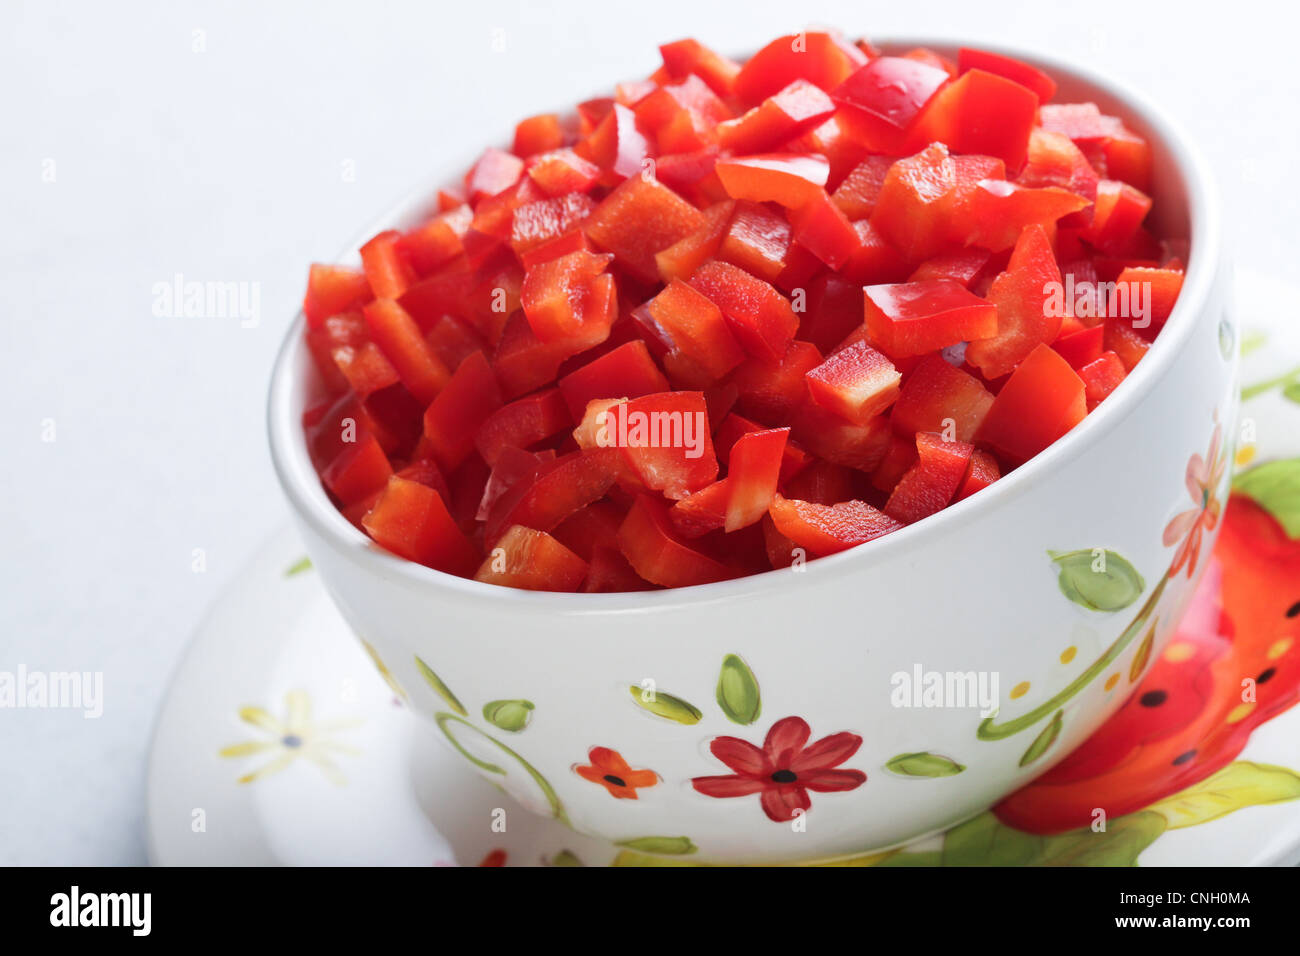 A macro image of a decorative bowl full of chopped, colorful red pepper on a matching plate with a white background. Stock Photo